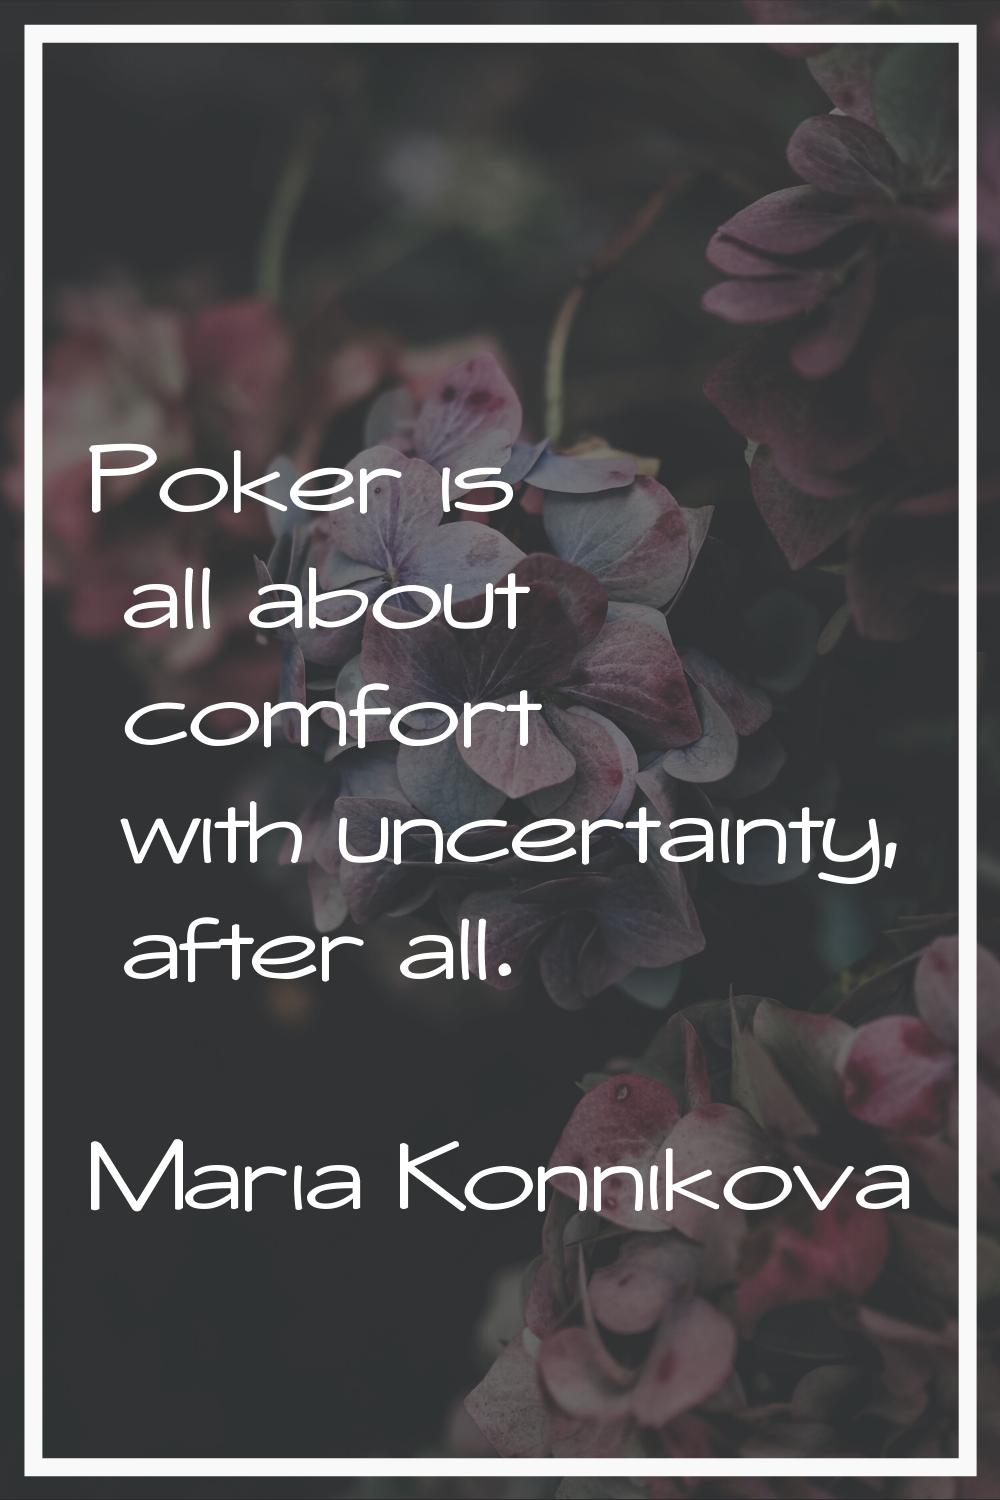 Poker is all about comfort with uncertainty, after all.